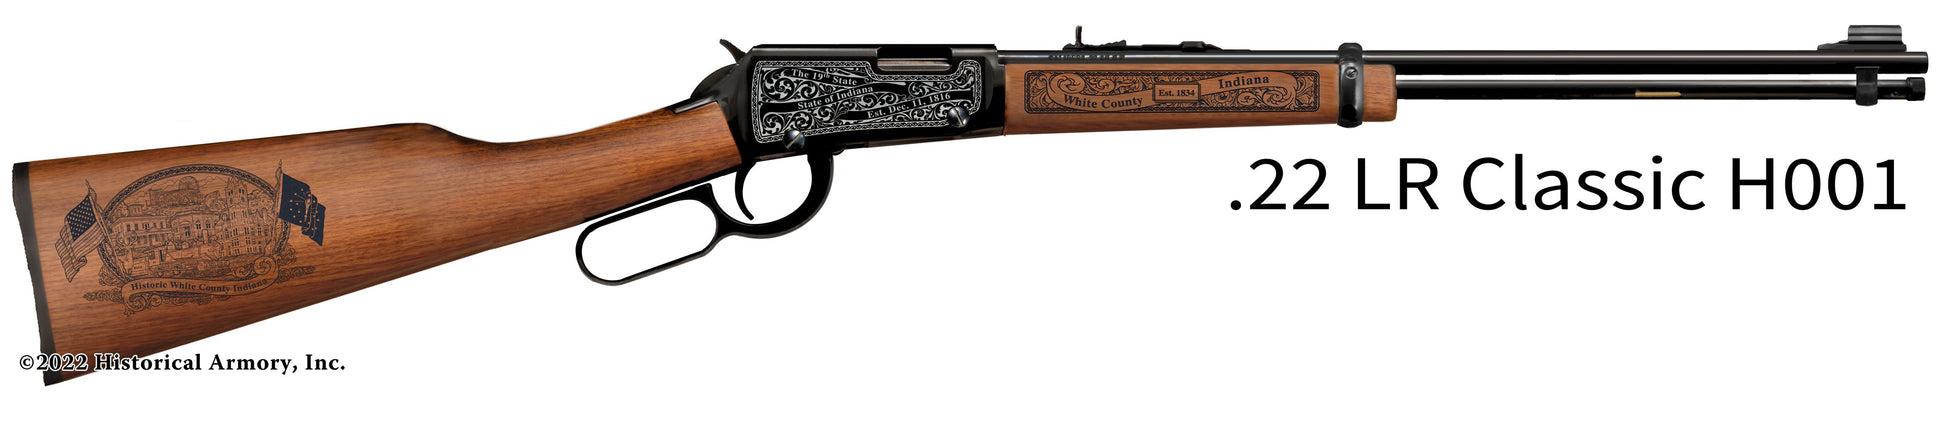 White County Indiana Engraved Henry H001 Rifle